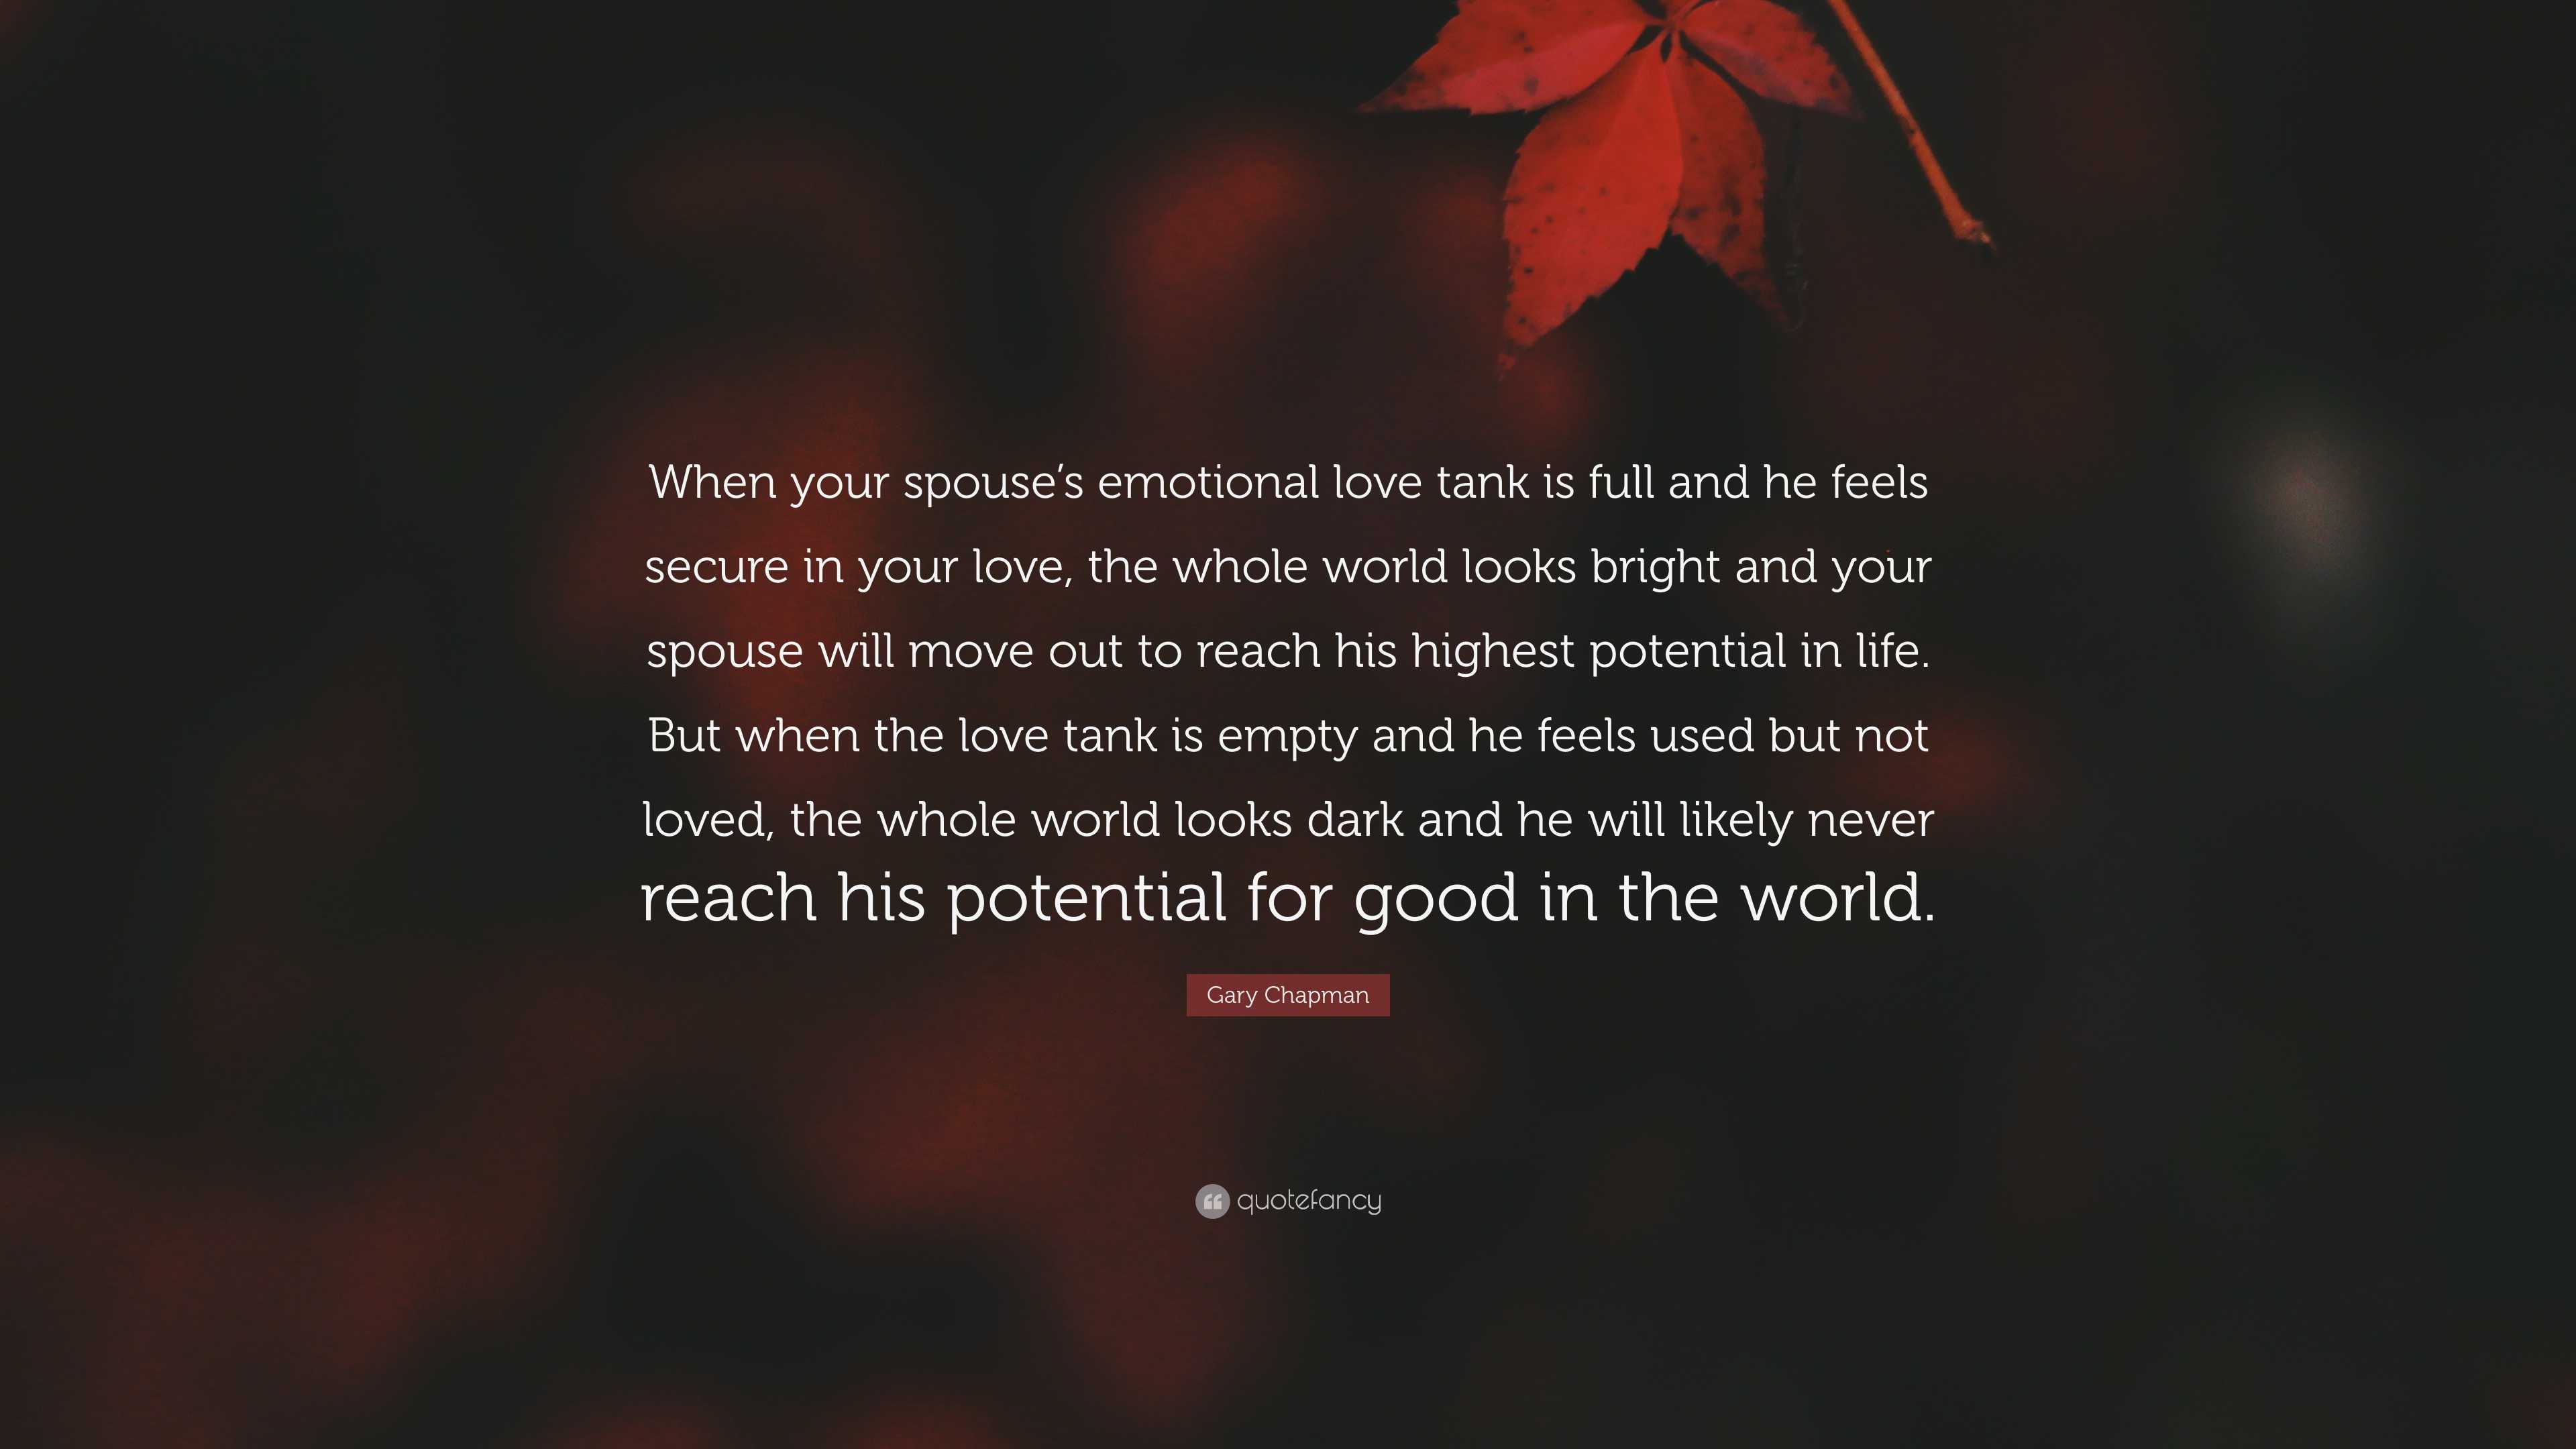 Gary Chapman Quote: “When your spouse's emotional love tank is full and he  feels secure in your love, the whole world looks bright and your s”